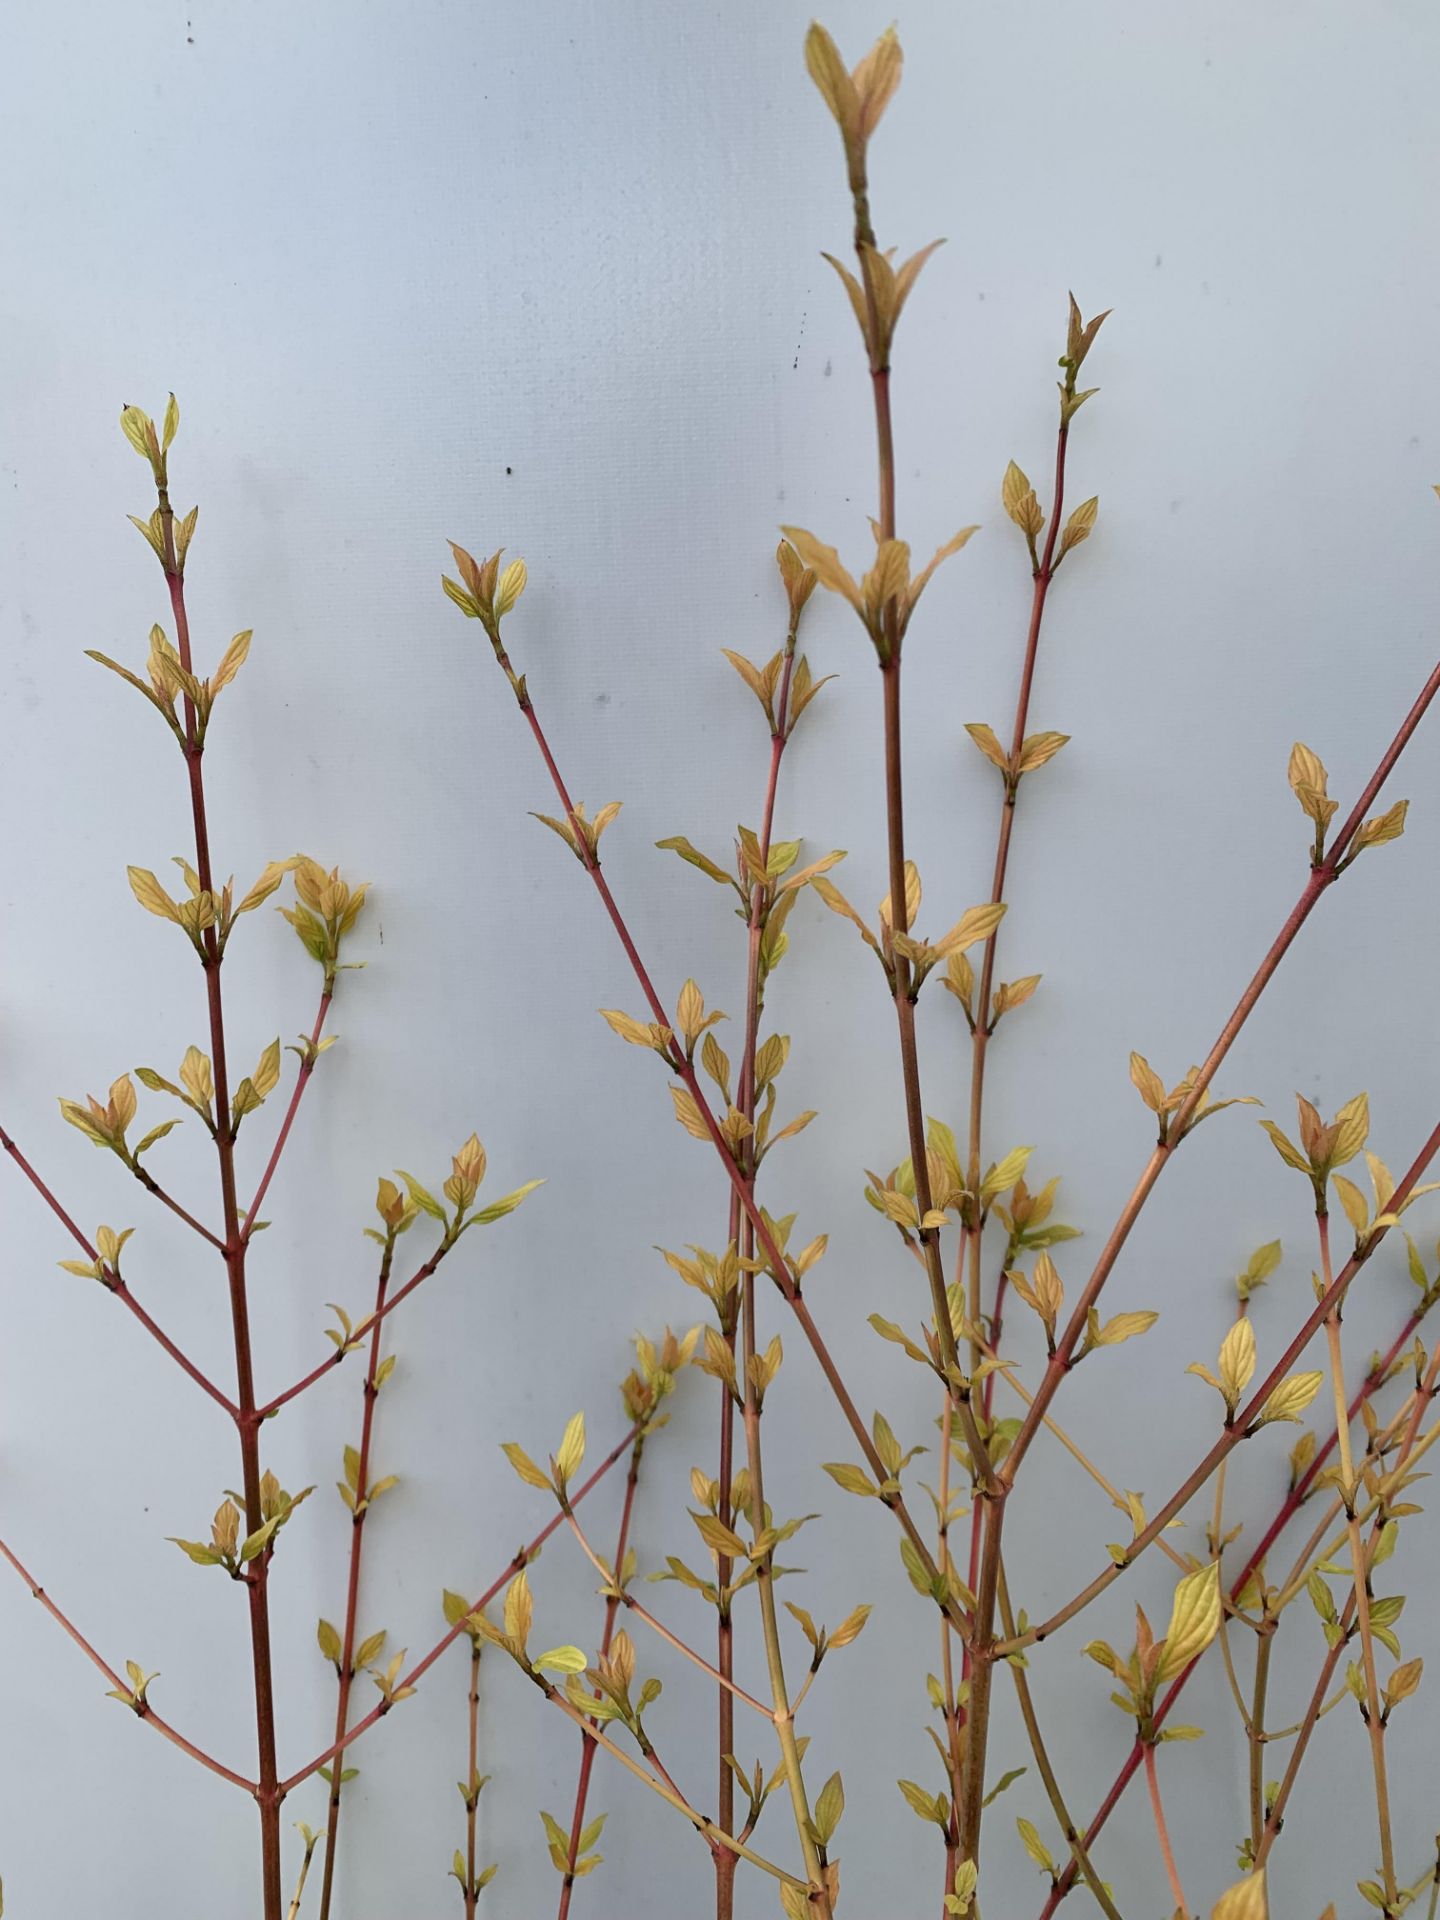 TWO CORNUS SANGUINEA 'MIDWINTER FIRE' IN 4 LTR POTS APPROX 90CM IN HEIGHT PLUS VAT TO BE SOLD FOR - Image 5 of 10